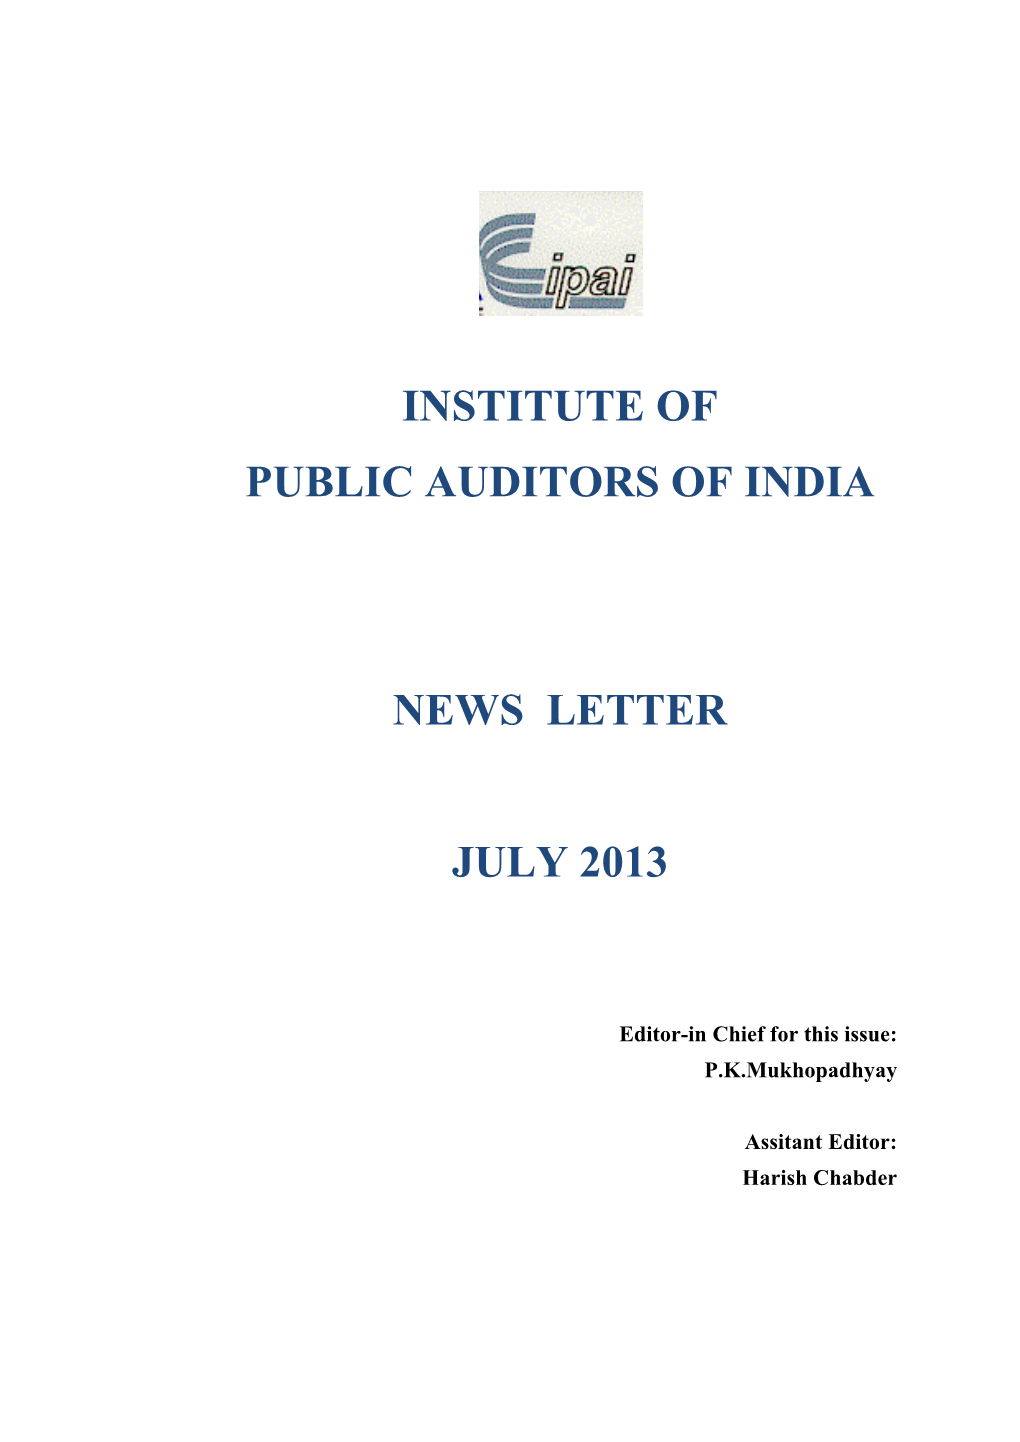 Institute of Public Auditors of India News Letter July 2013